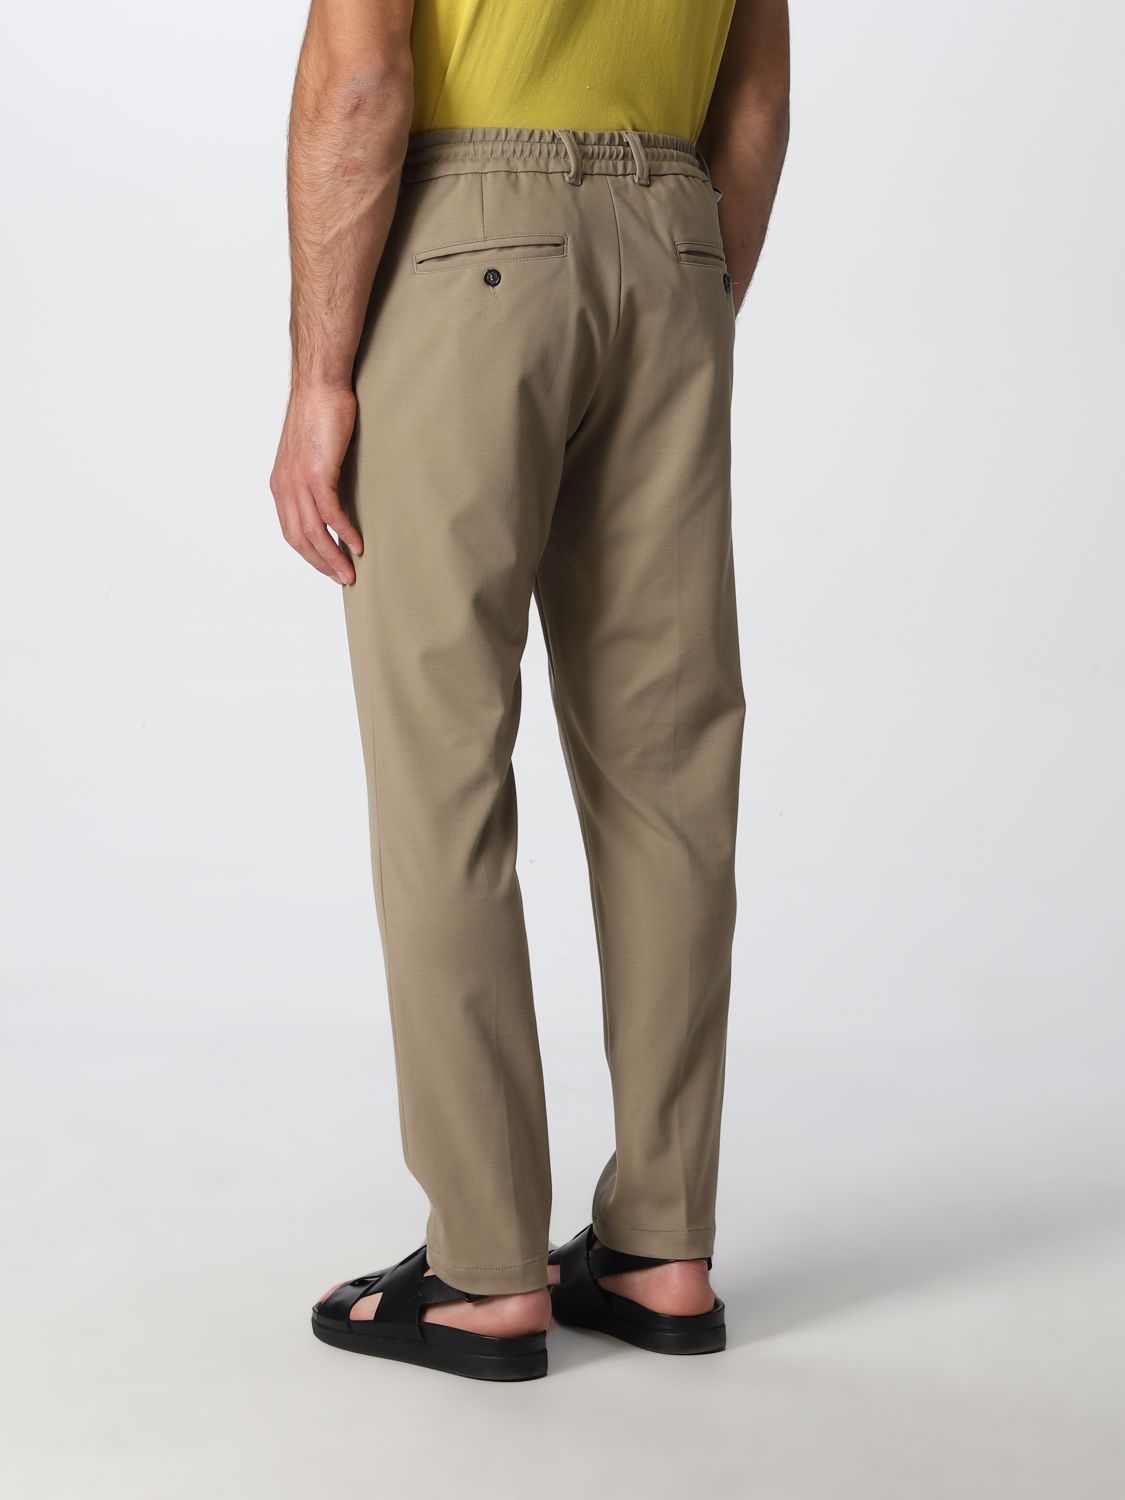 Trousers Paolo Pecora: Paolo Pecora trousers for men beige 2